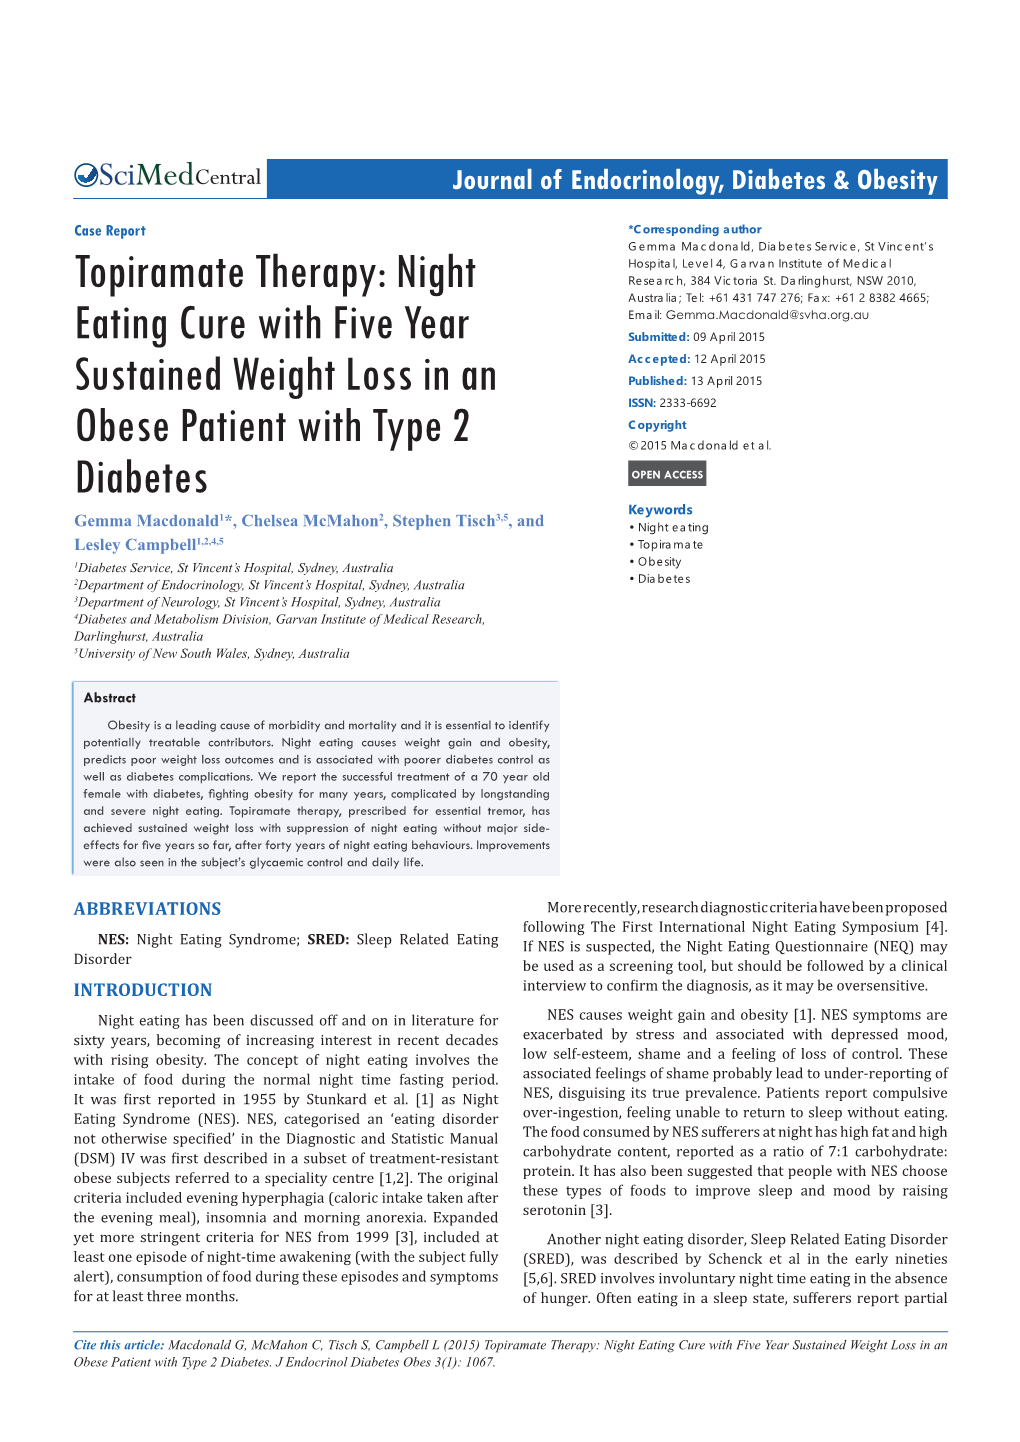 Topiramate Therapy: Night Eating Cure with Five Year Sustained Weight Loss in an Obese Patient with Type 2 Diabetes